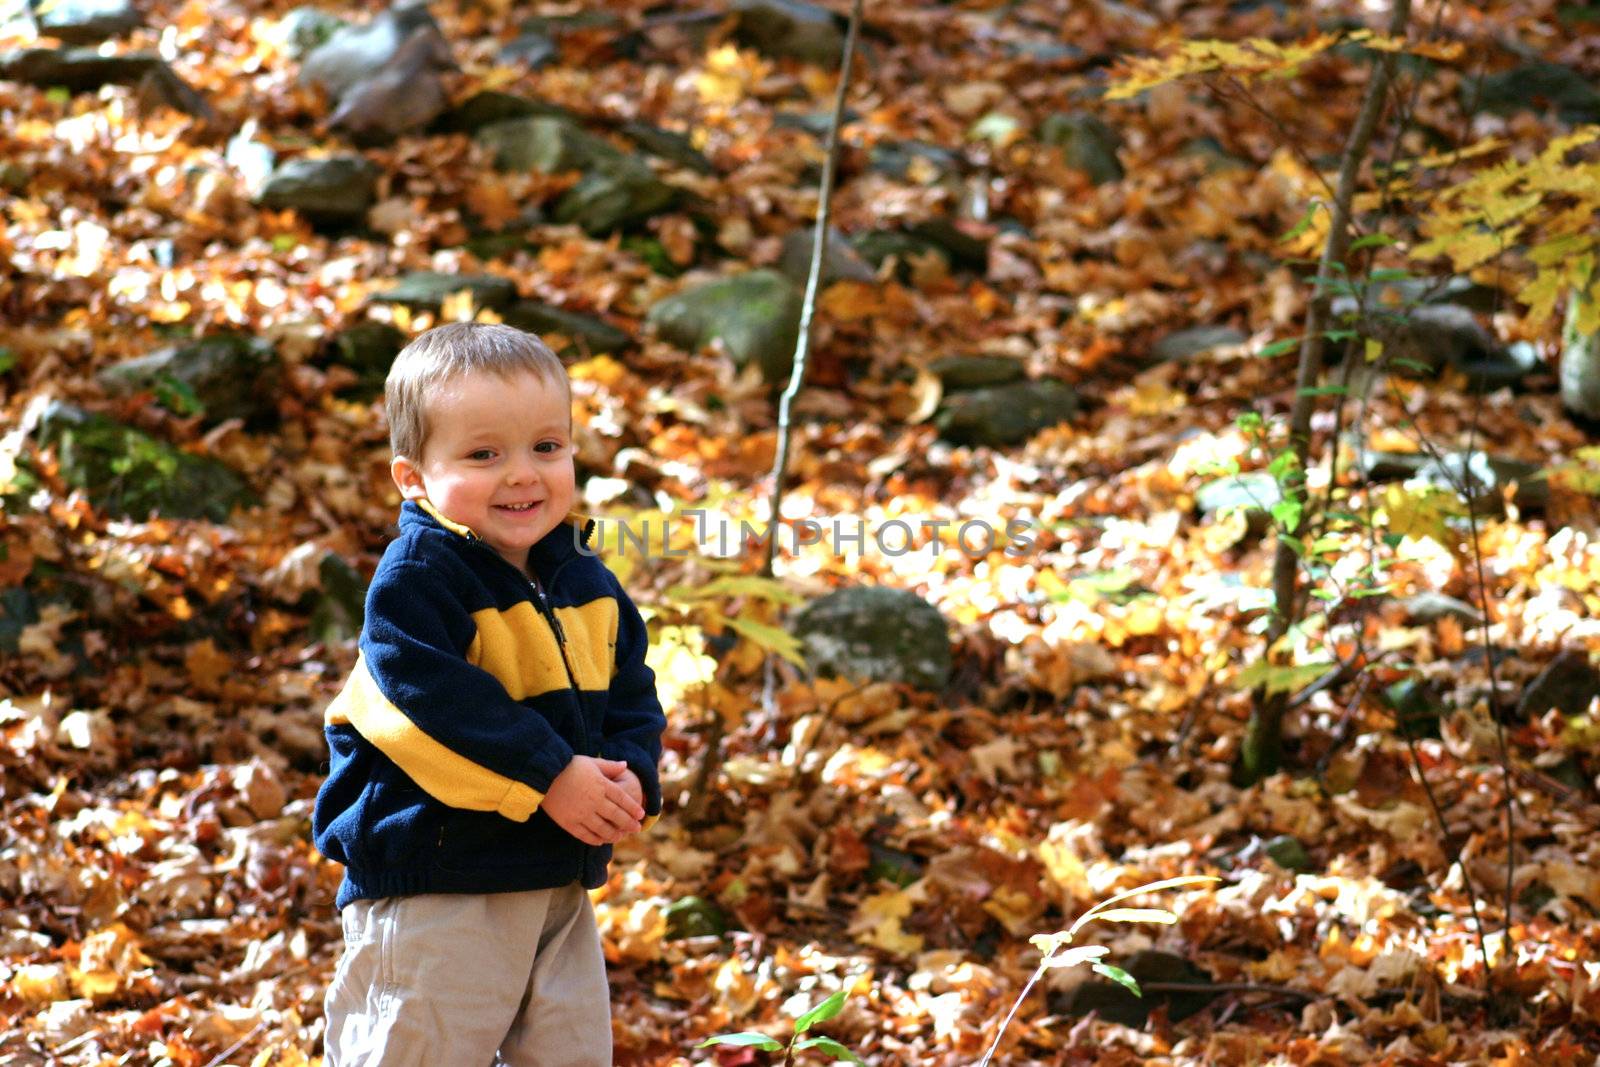 Boy standing by a fence in an autumn scenery